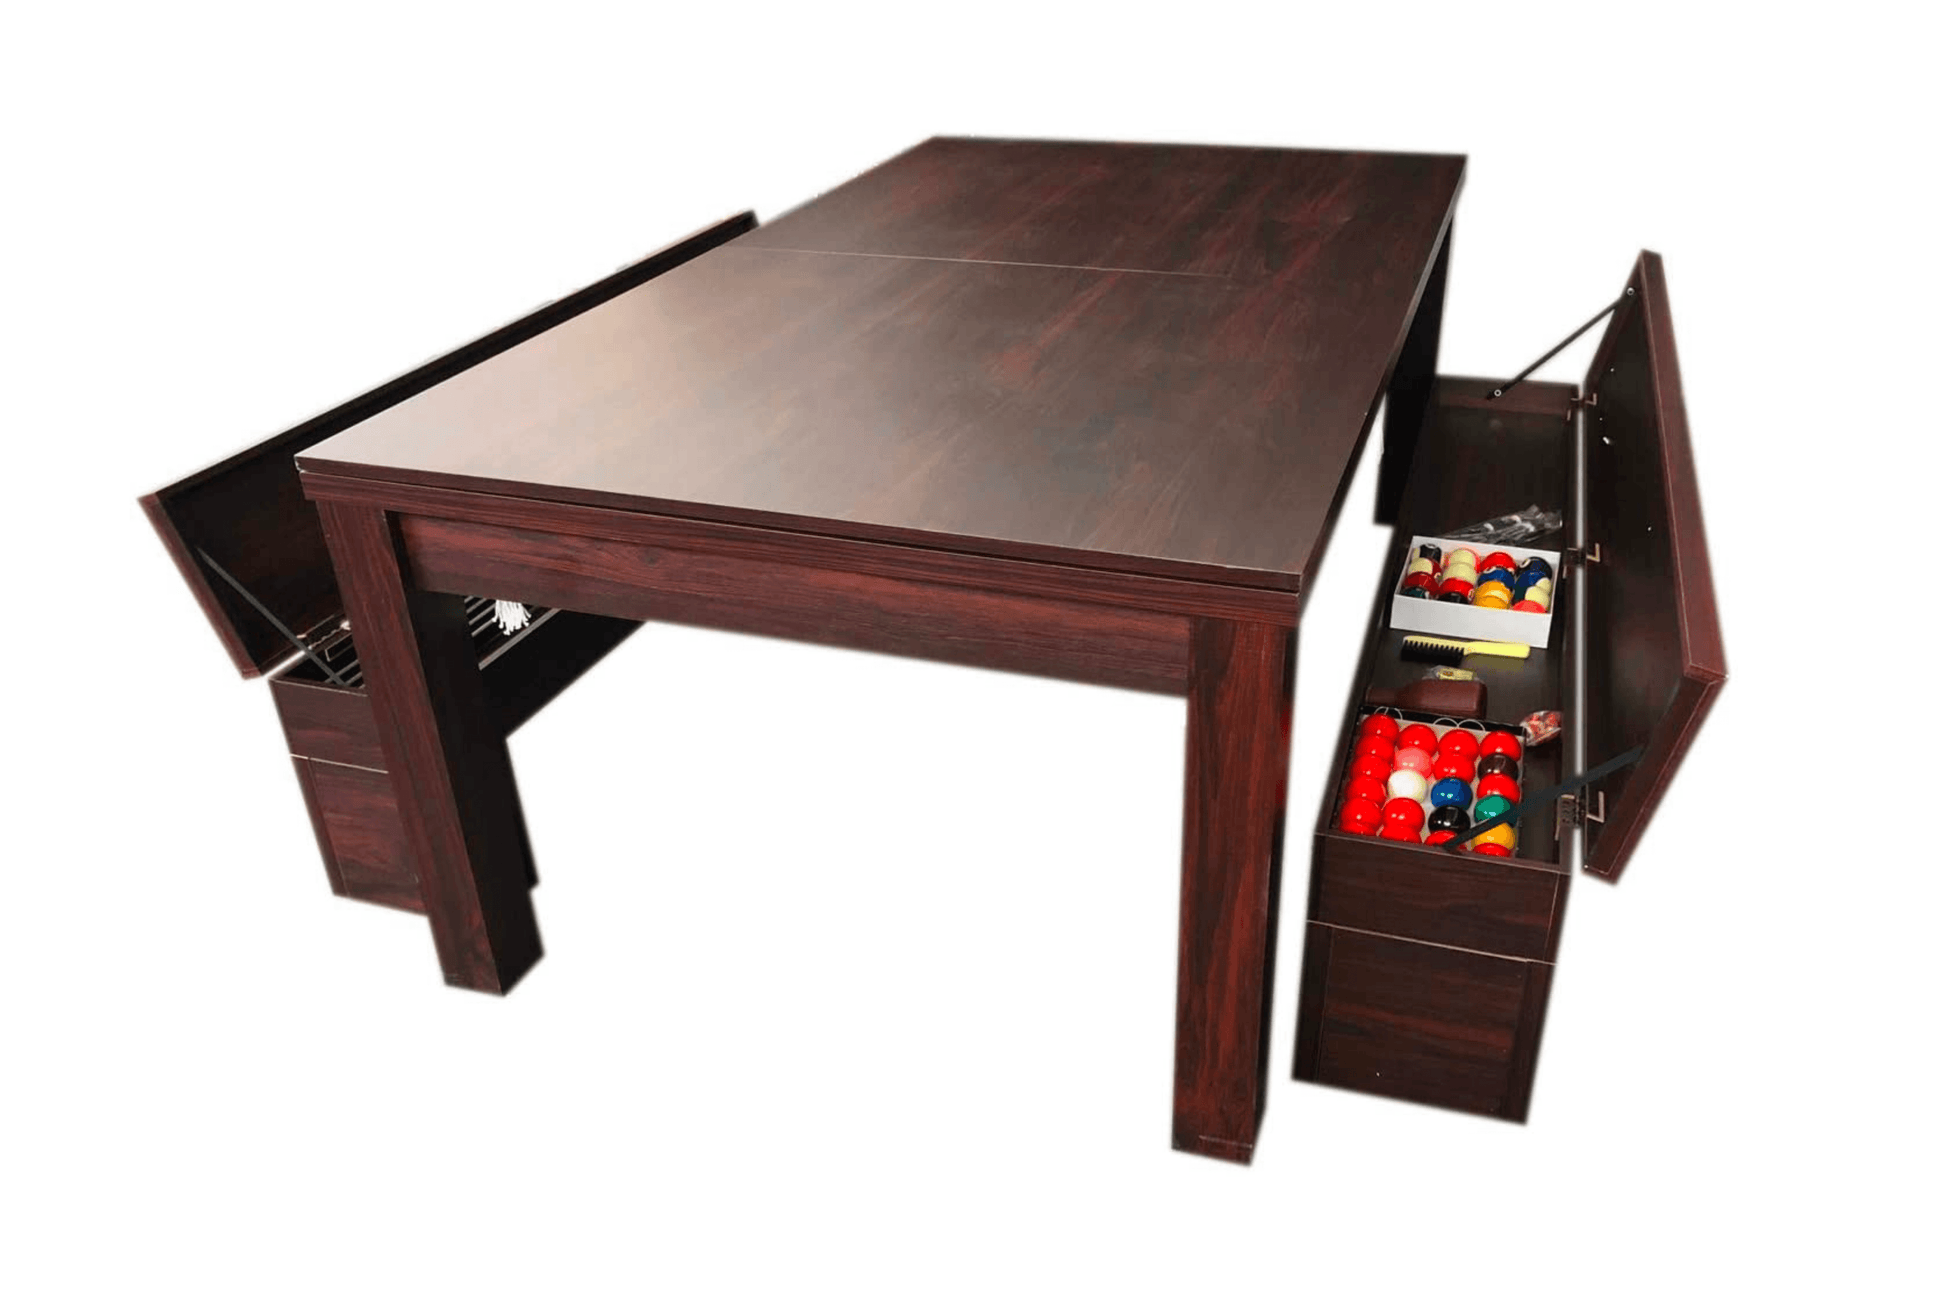 7Ft Pool Table Billiard Became a Dinner Table with Benches Model 18721 - Venini Furniture 